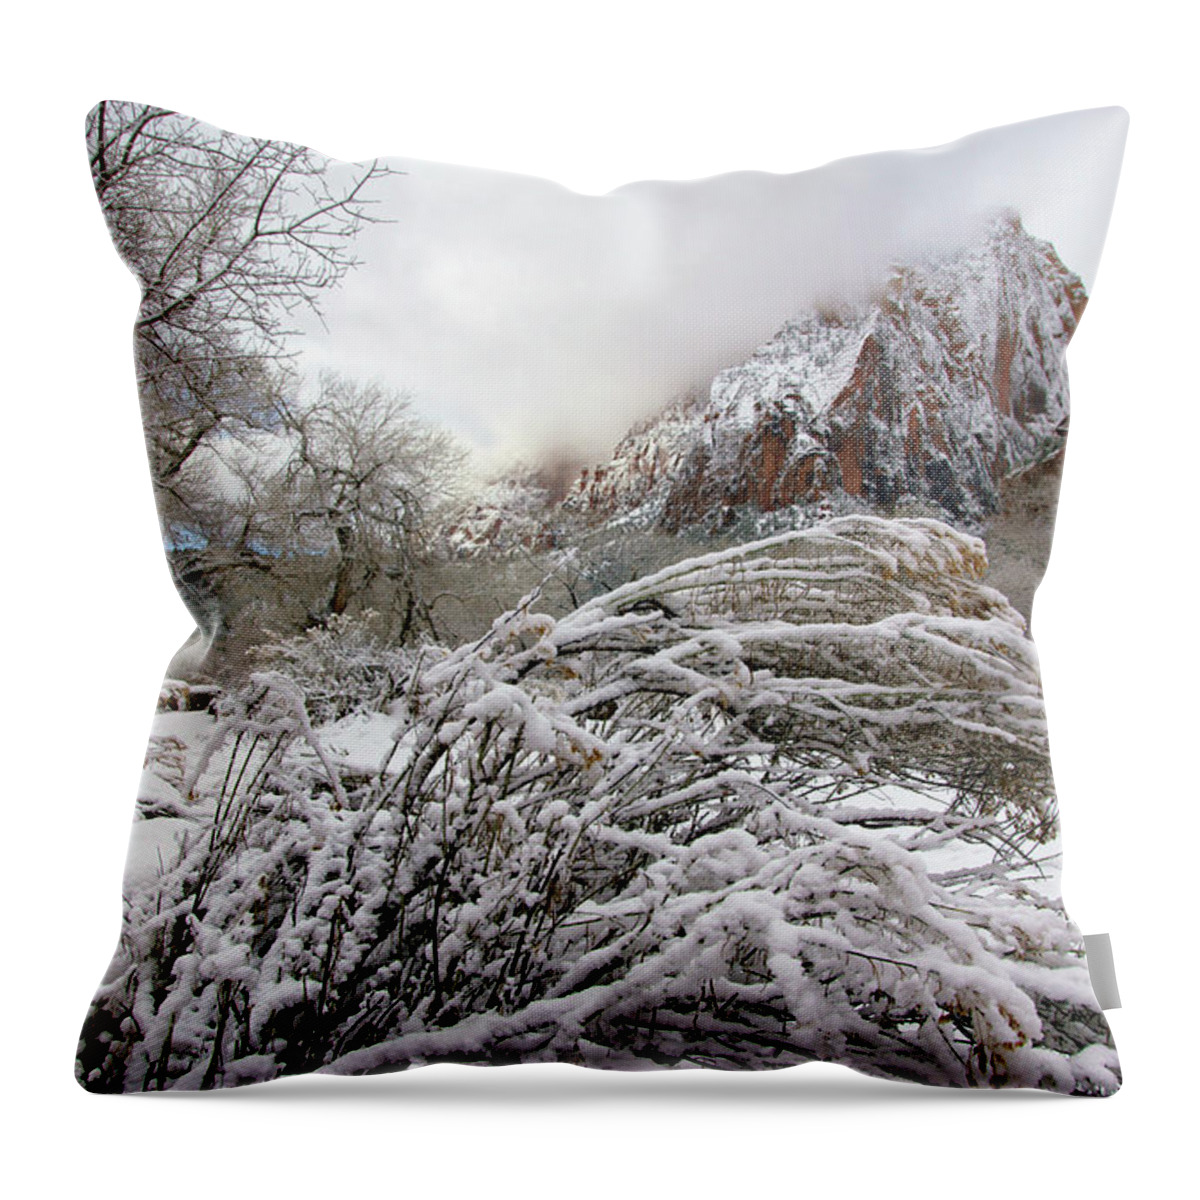 Zion Throw Pillow featuring the photograph Snowy Mountains in Zion by Daniel Woodrum